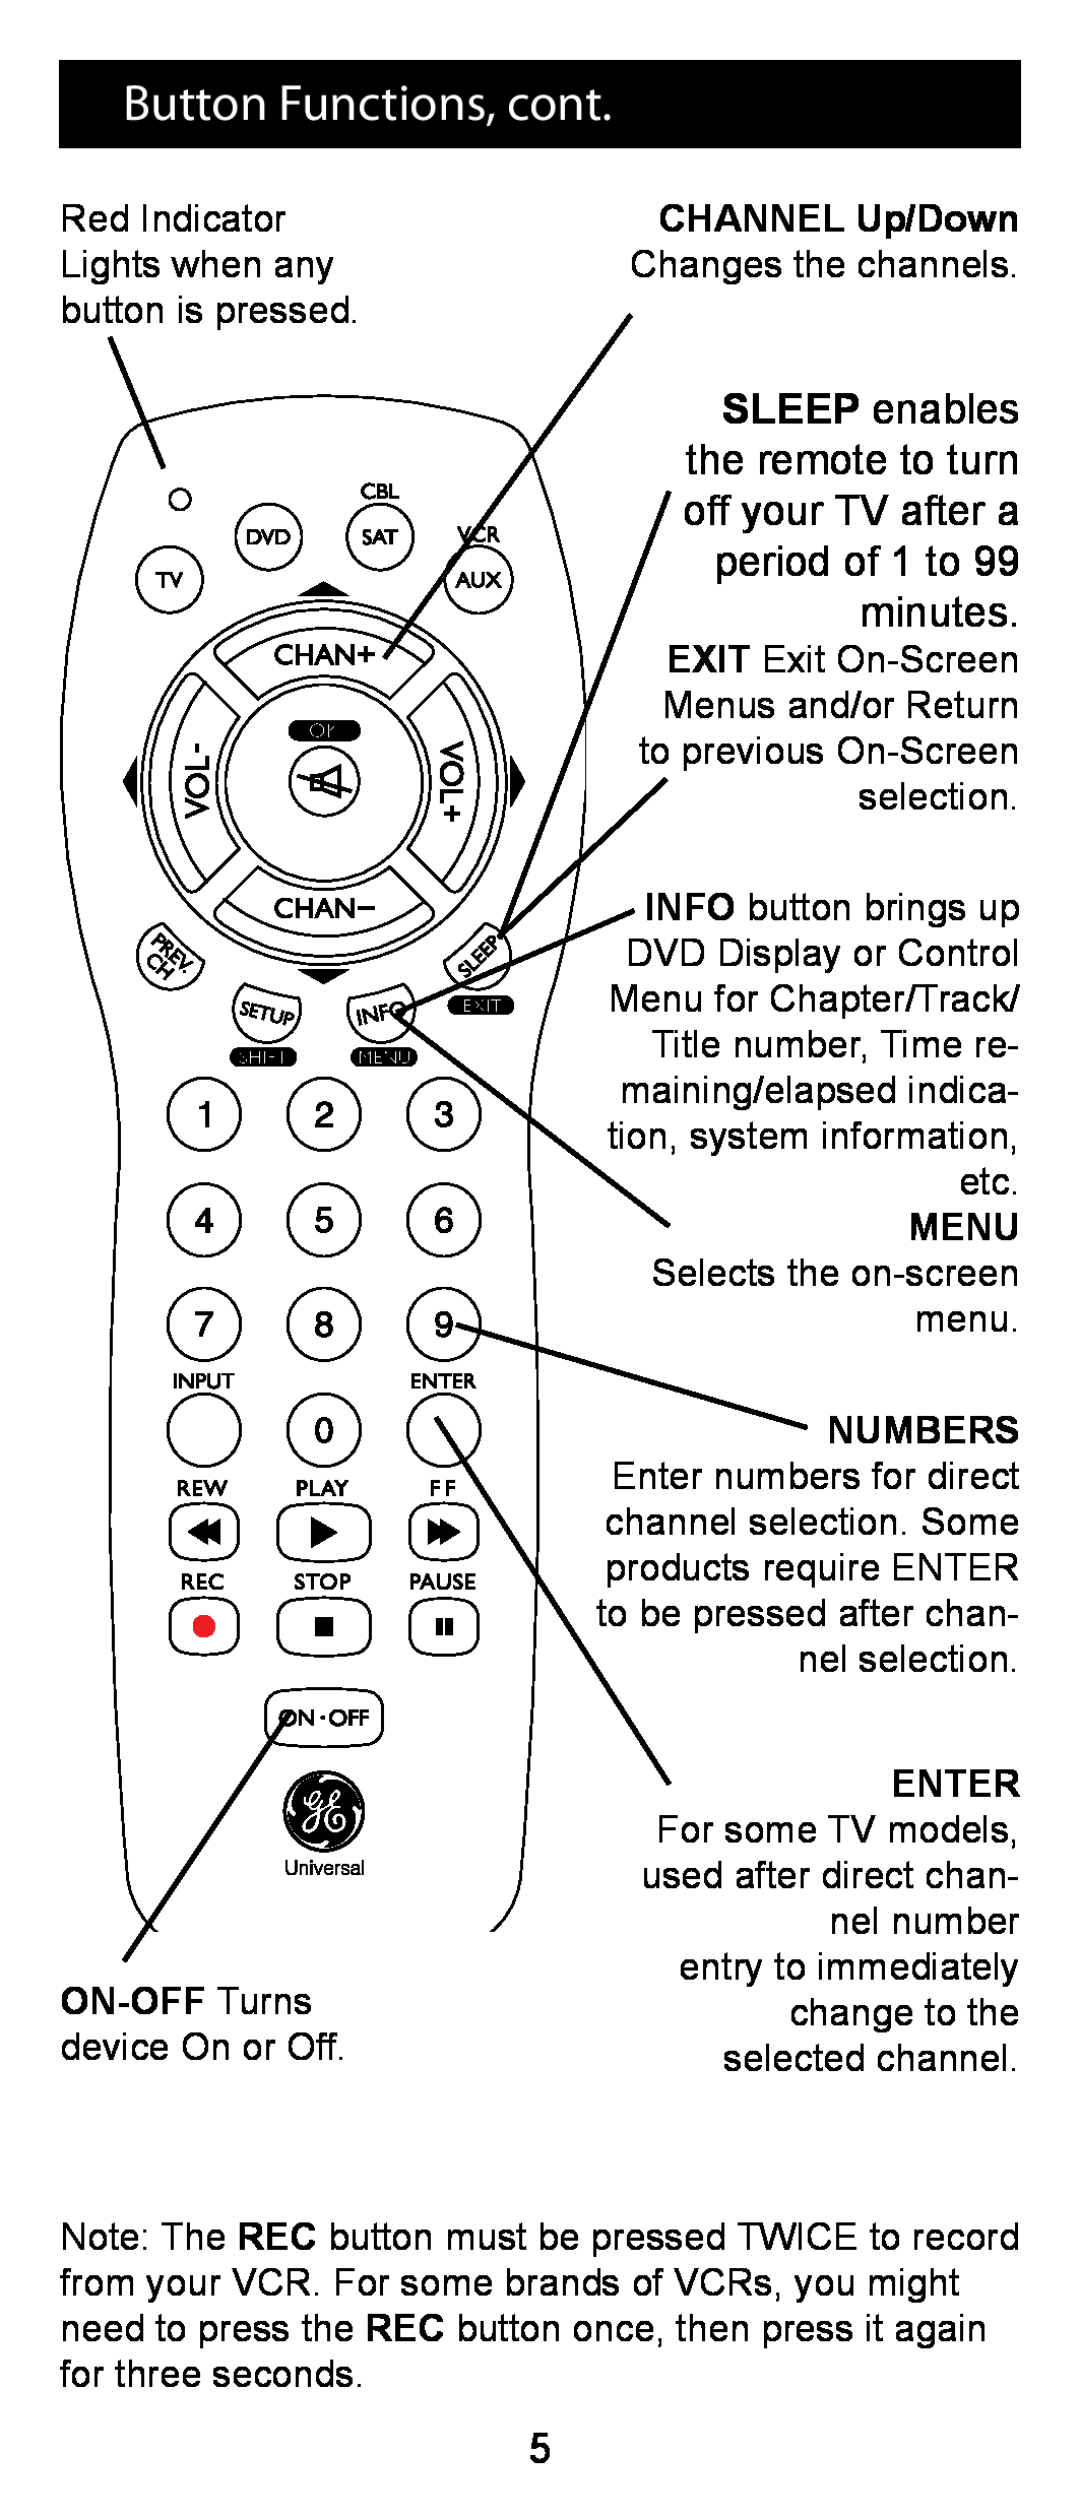 Jasco RM24993 instruction manual Button Functions, cont, ON-OFF Turns device On or Off, CHANNEL Up/Down 